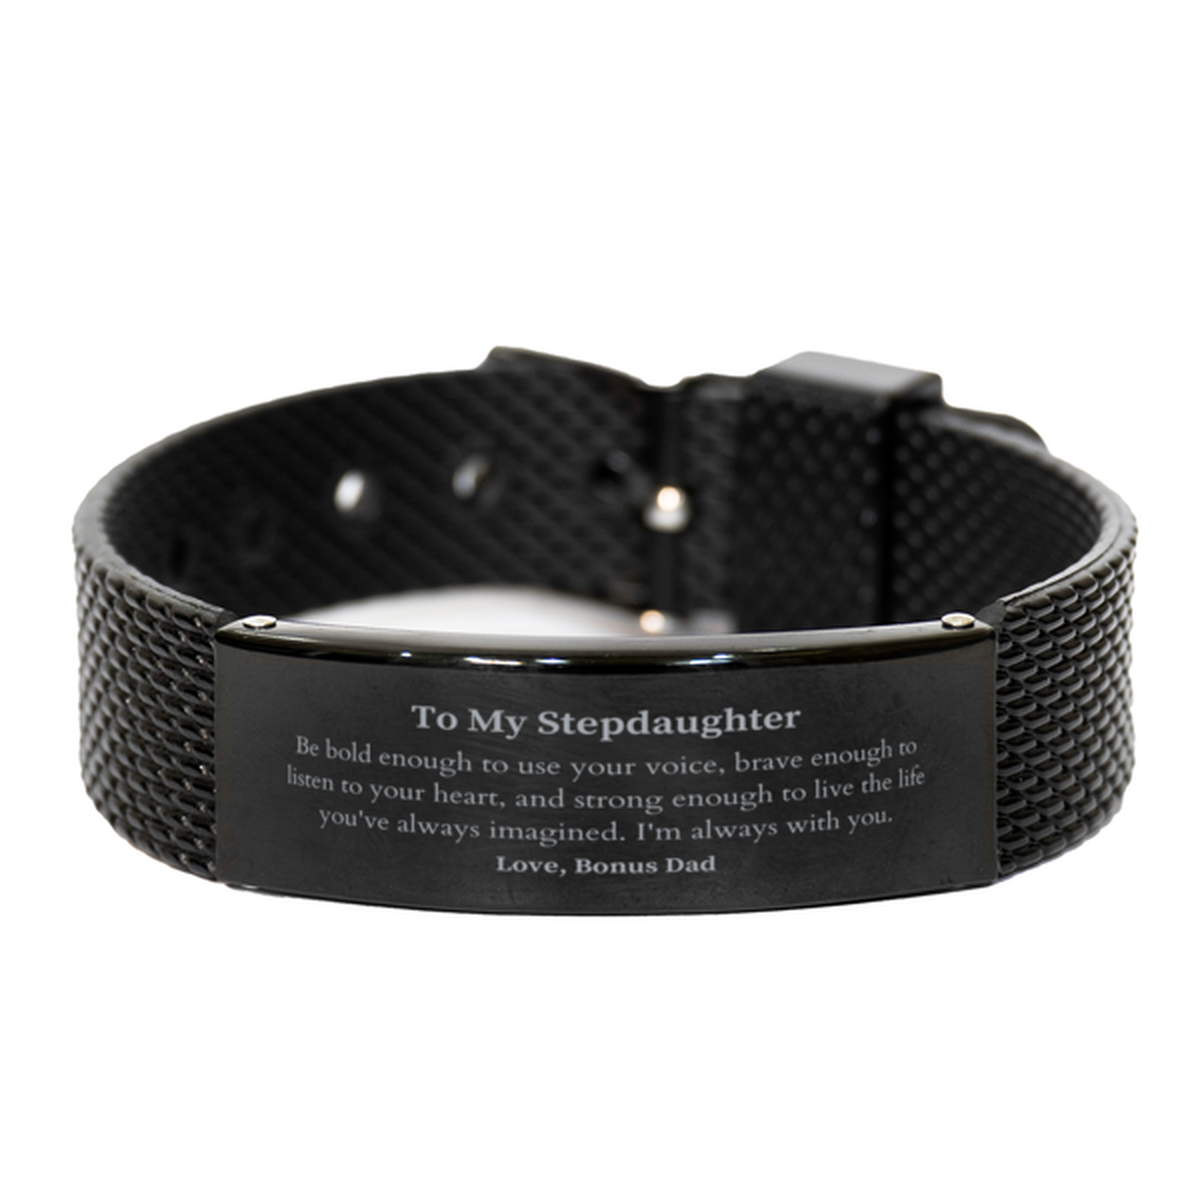 Keepsake Stepdaughter Black Shark Mesh Bracelet Gift Idea Graduation Christmas Birthday Stepdaughter from Bonus Dad, Stepdaughter Be bold enough to use your voice, brave enough to listen to your heart. Love, Bonus Dad